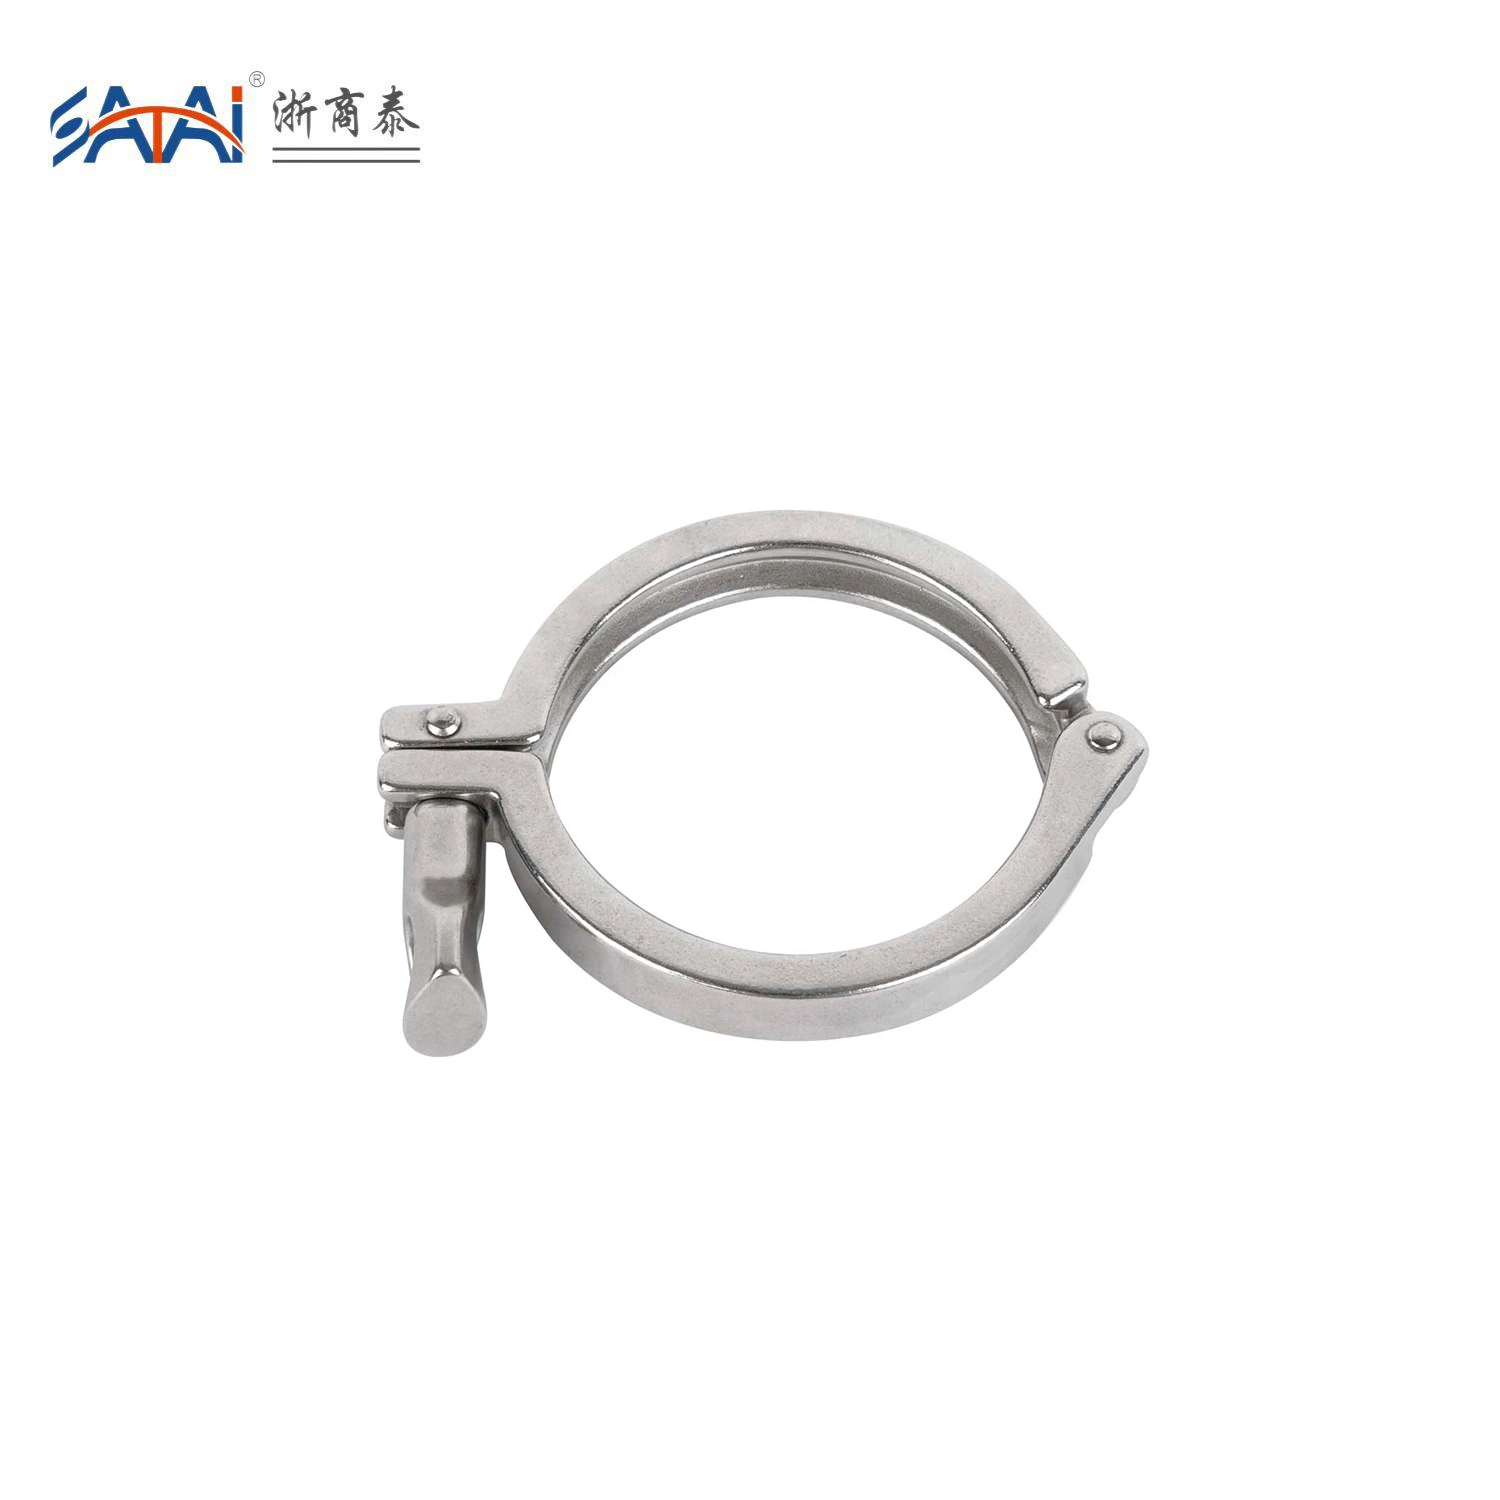 Heavy Duty SS304 Stainless Steel Pipe Fitting Clamp Single Hinge Overlap Clamp